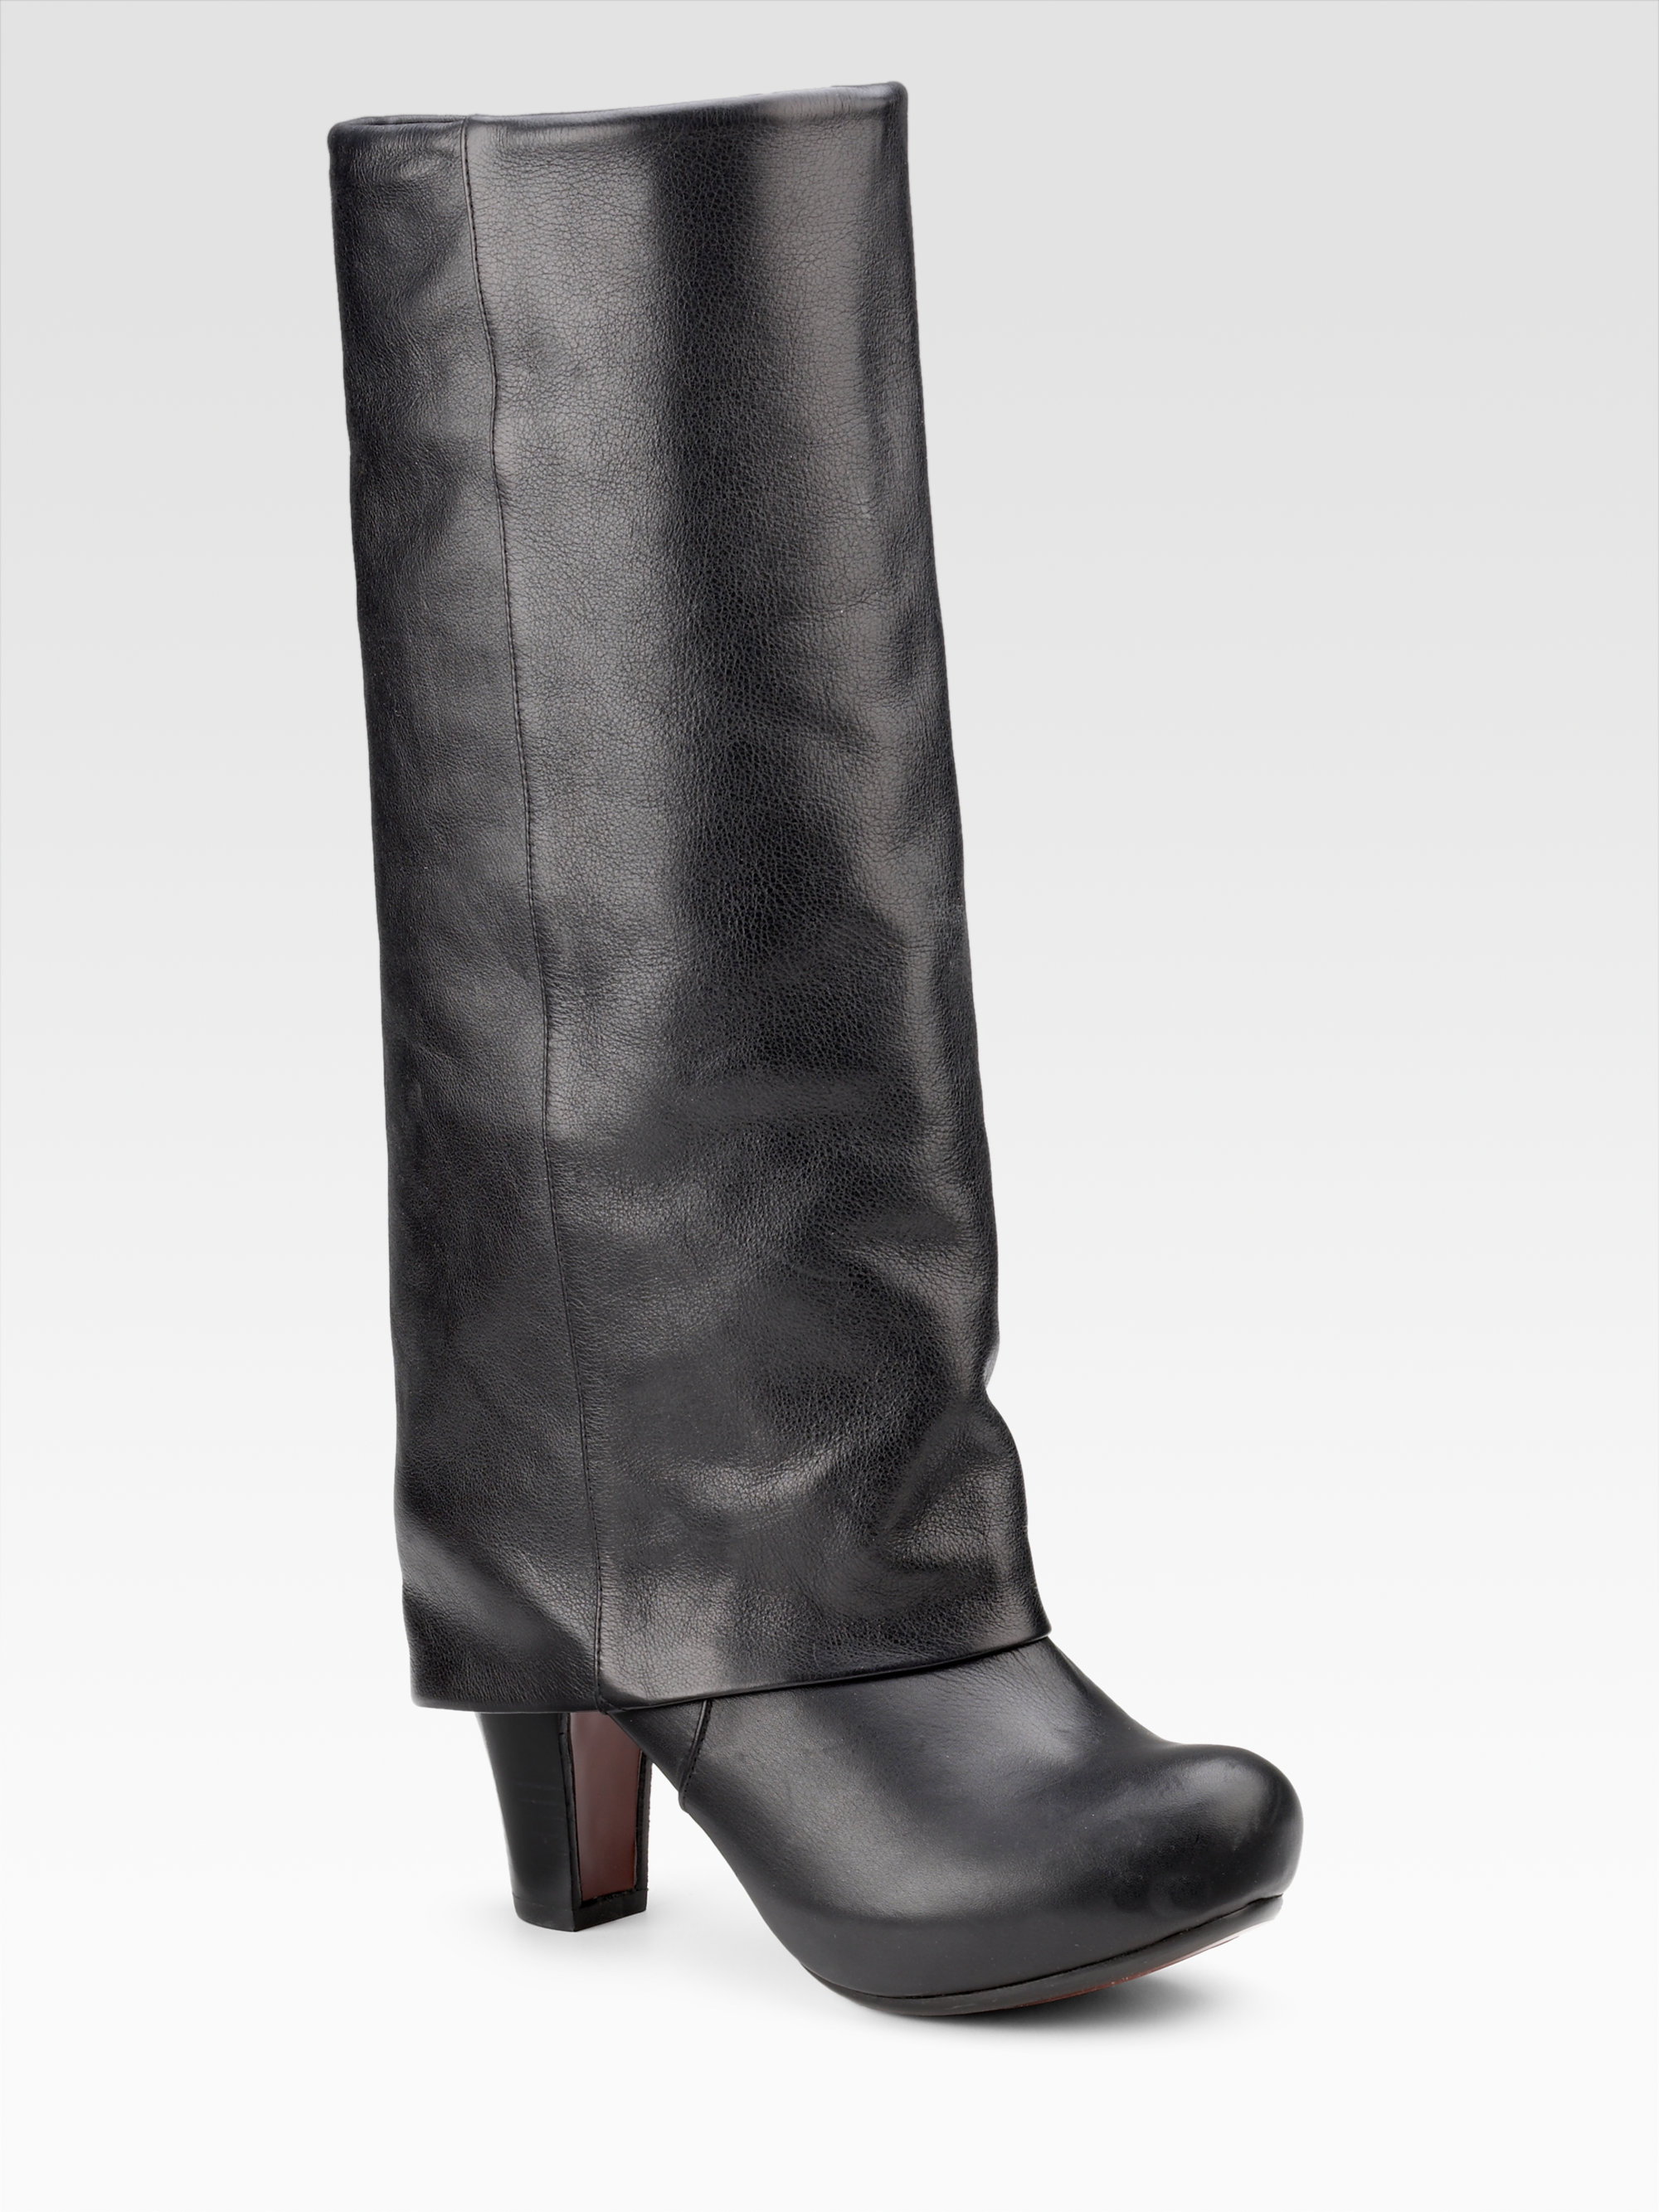 Chie Mihara Tall Cuffed Boots in Black 